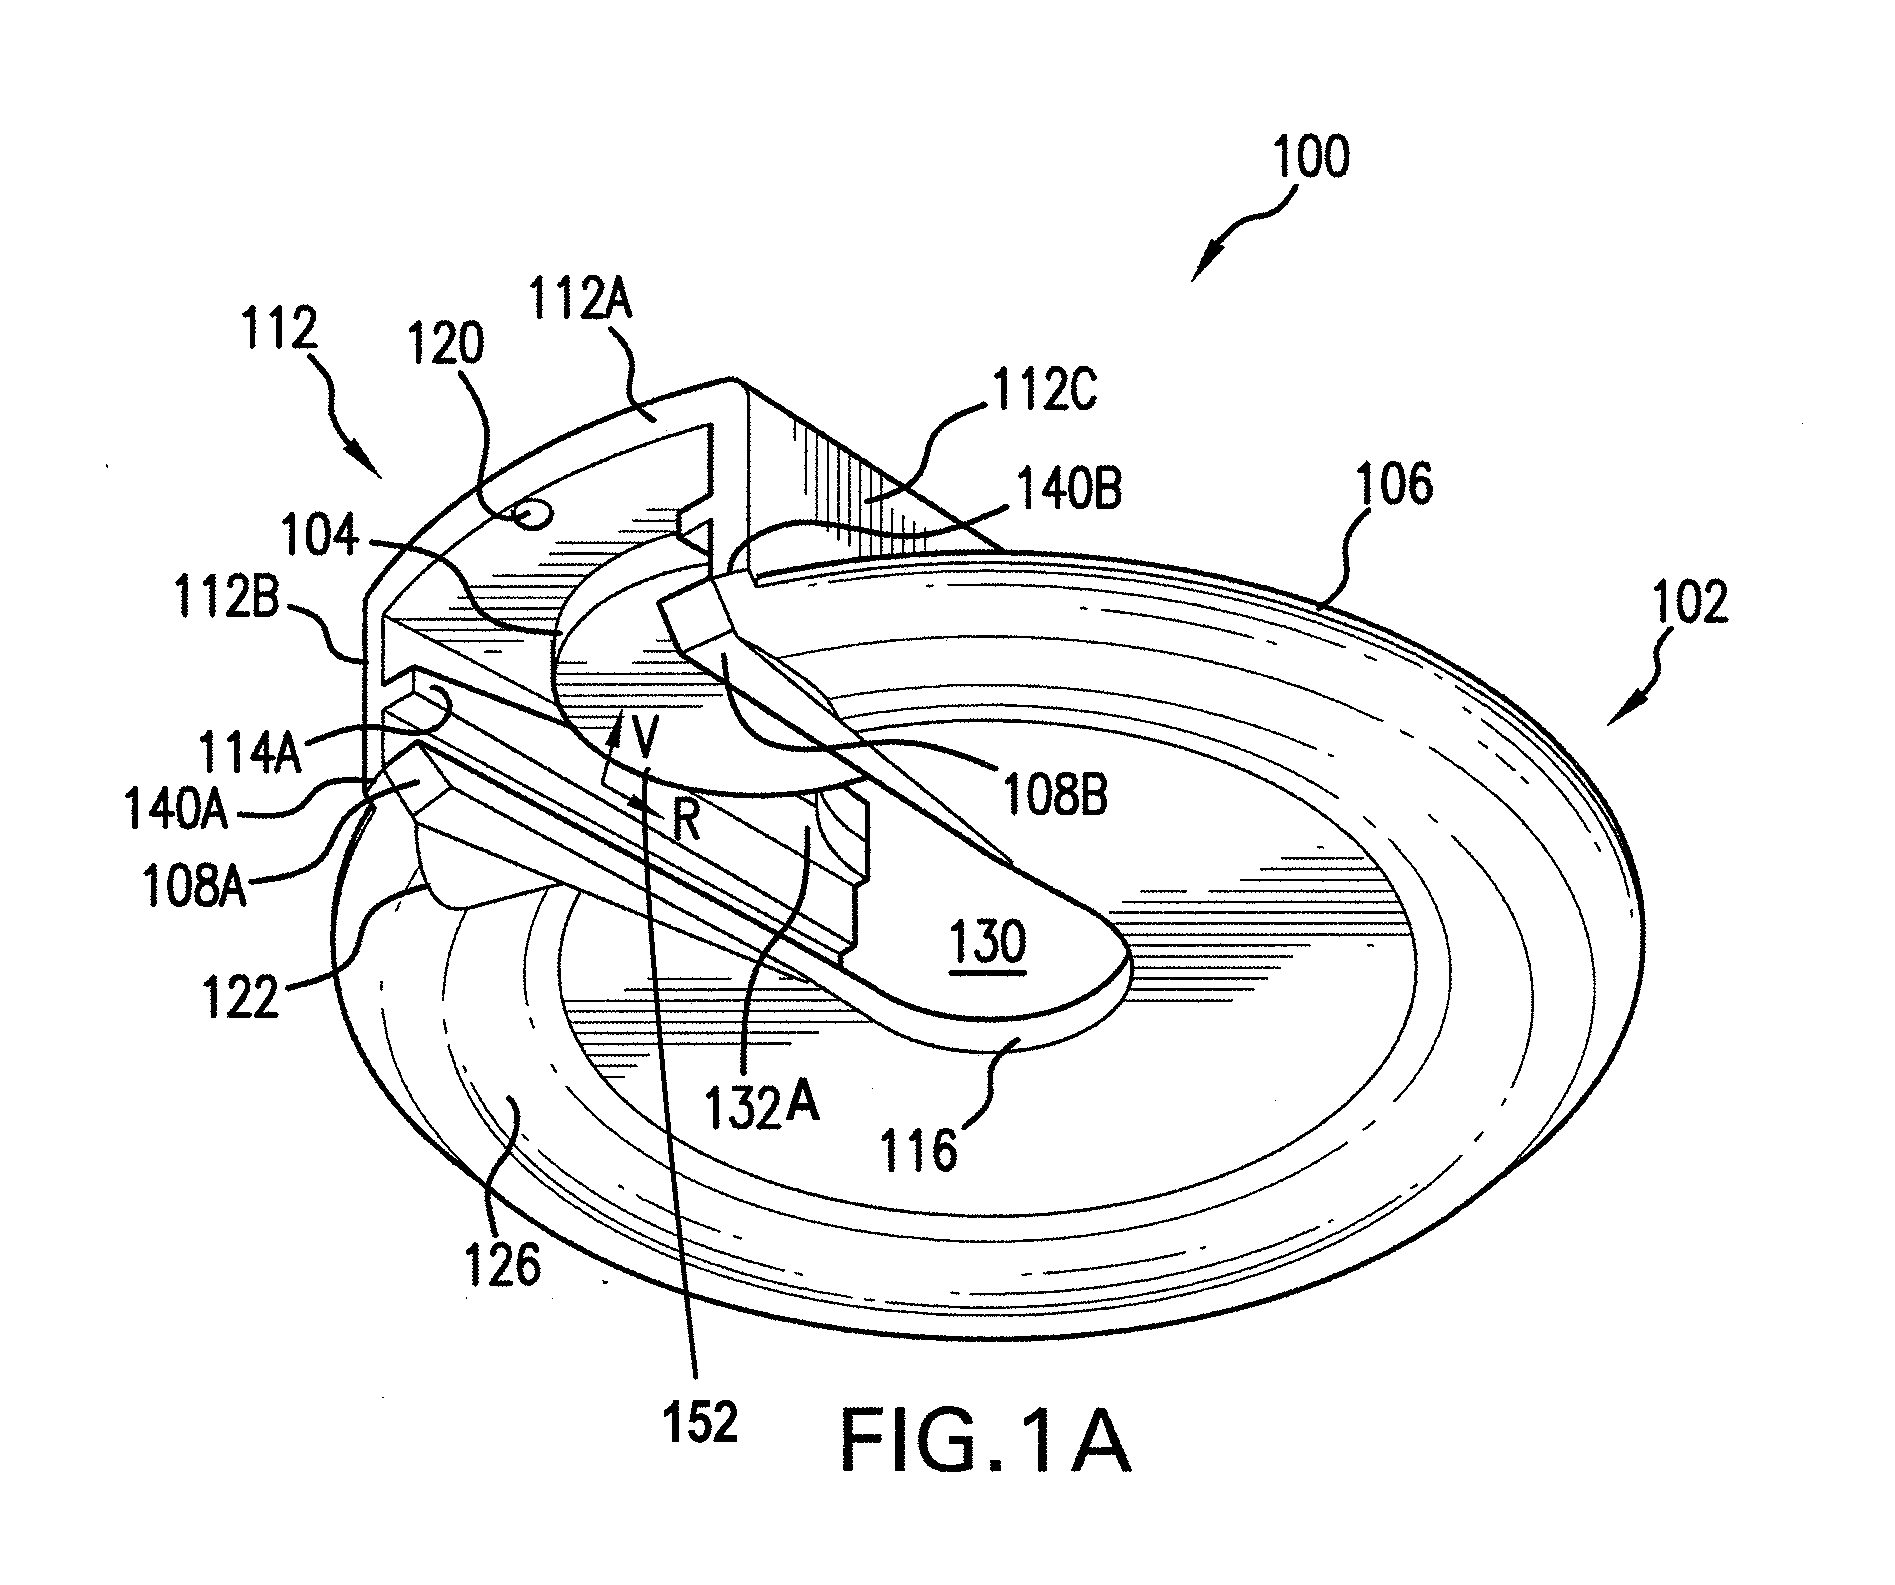 Needle Safety Guard Adapted To Attach To A Liquid Container